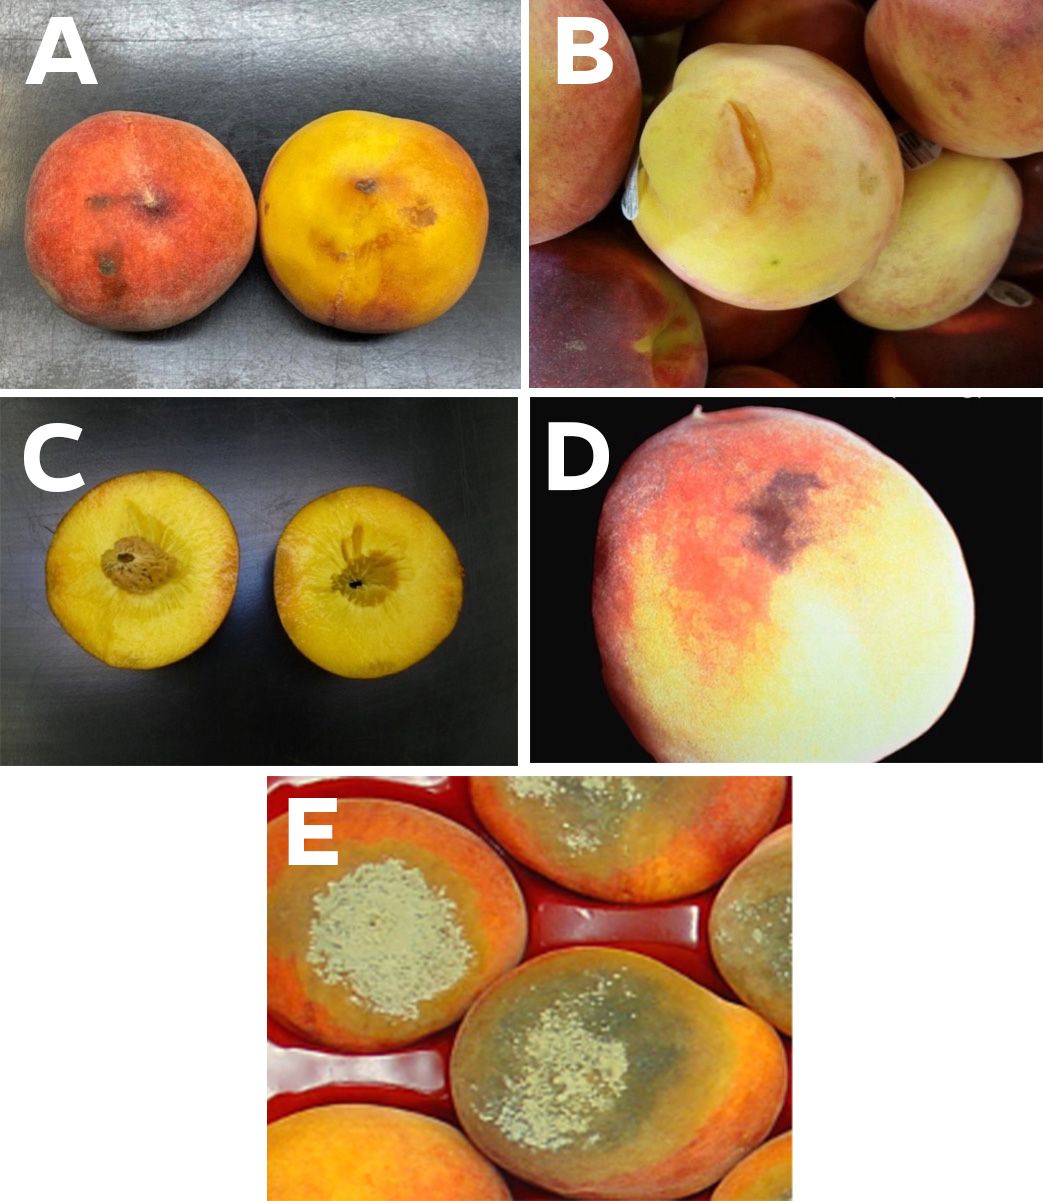 Examples of peach postharvest defects including abrasions (A.), cuts (B.), bruising (C.), peel inking (D.), and decay caused by brown rot (E.). 